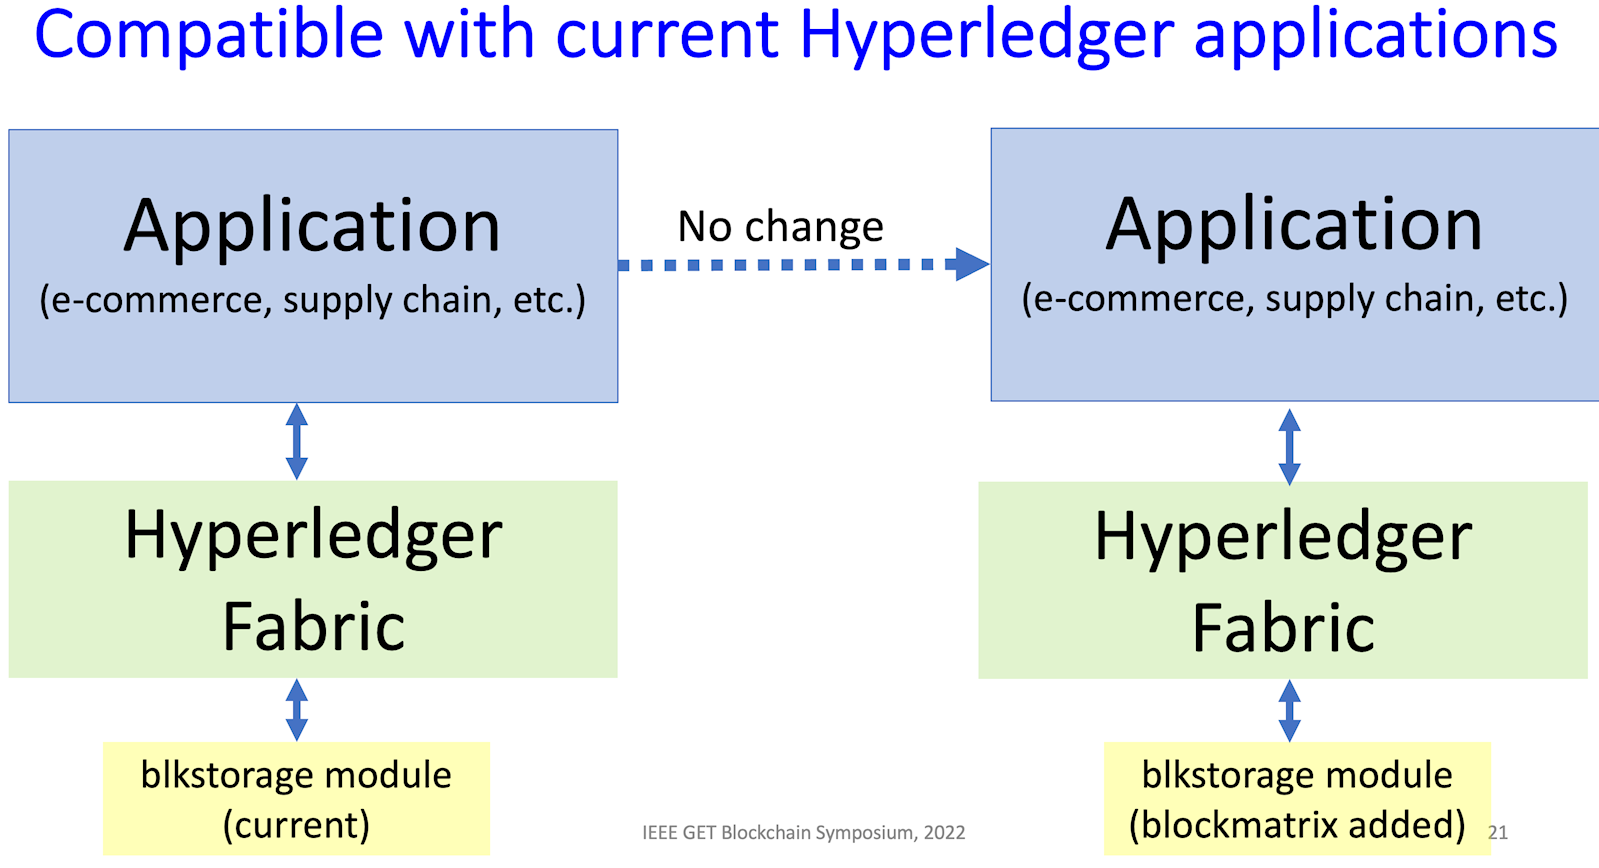 Hyperledger Fabric drop-in component 